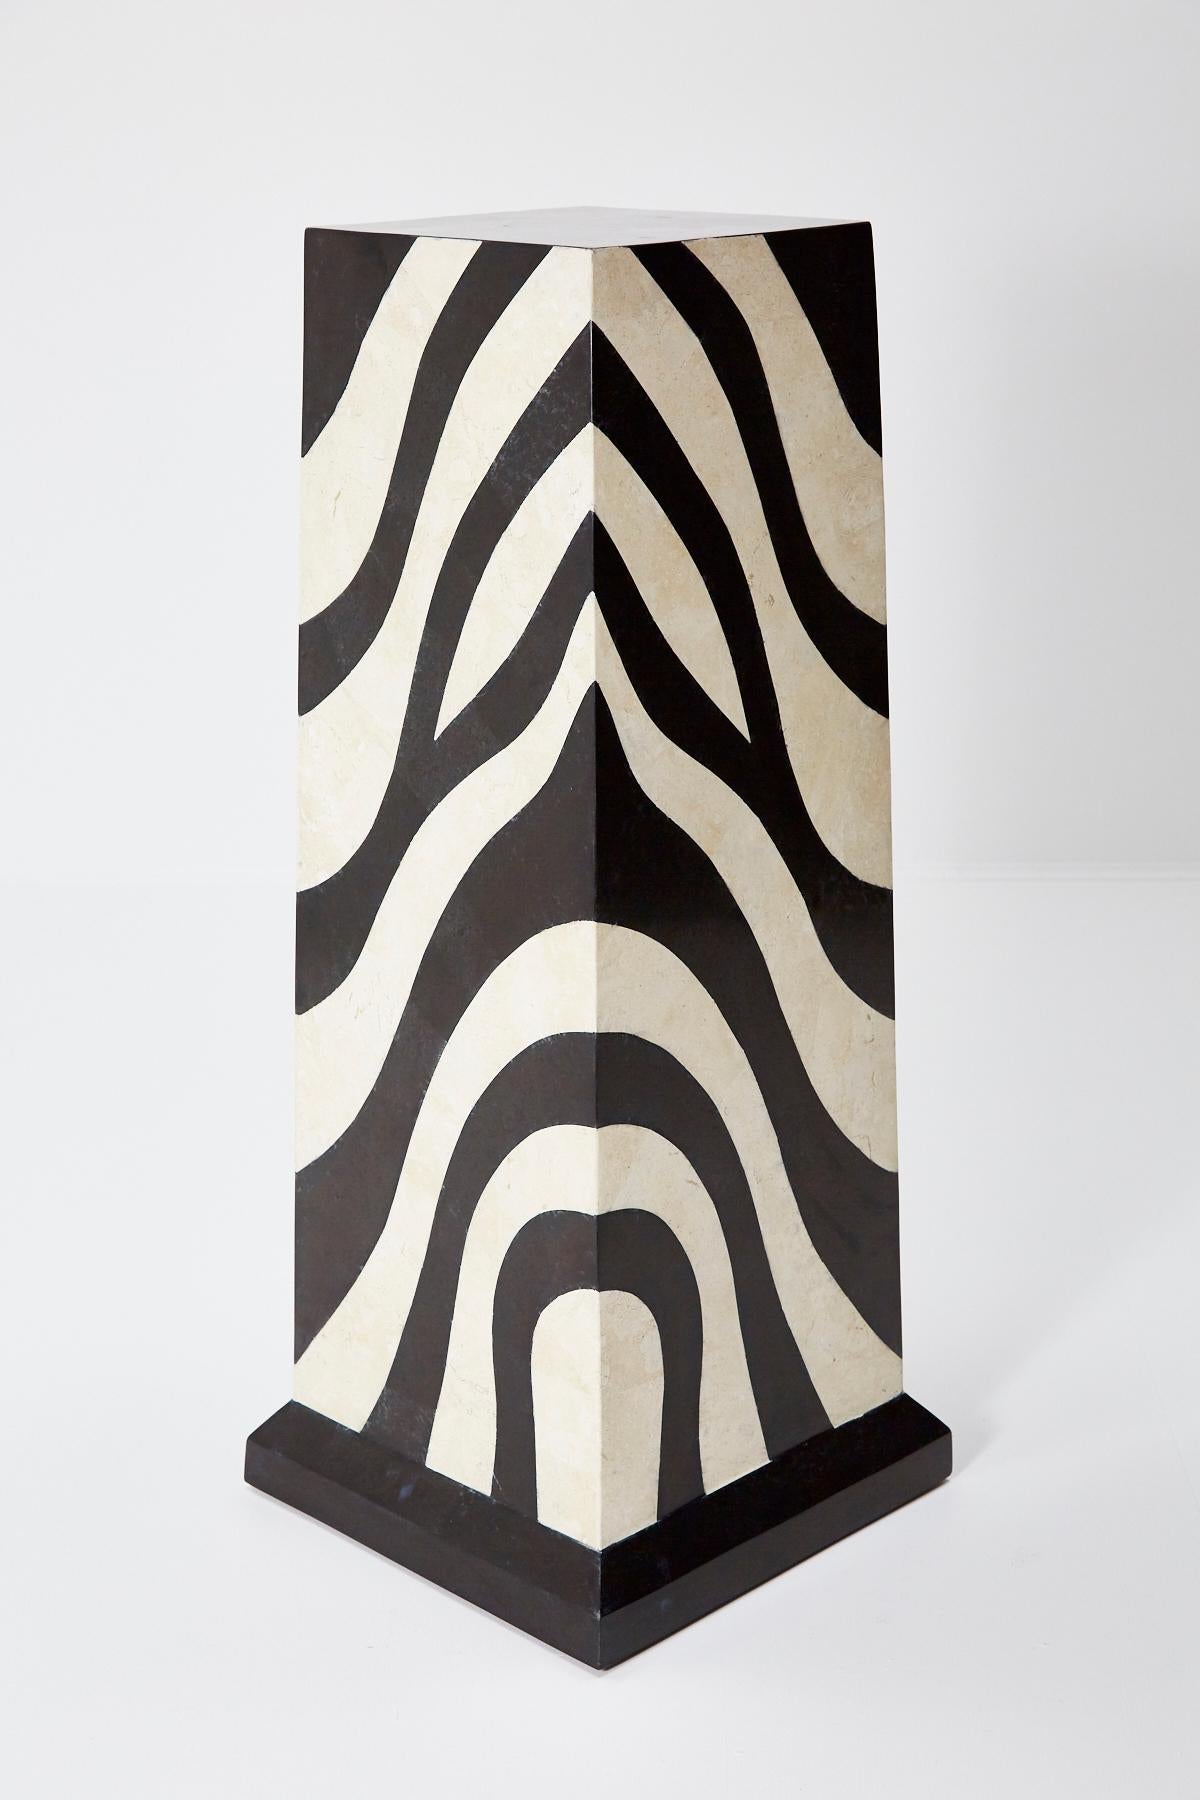 Square tessellated stone pedestal with zebra pattern and solid black base. Black and white stone hand-inlaid over fiberglass body.

Measures: Tall 42 inches.

All furnishings are made from 100% natural Fossil Stone or Seashell inlay, carefully hand